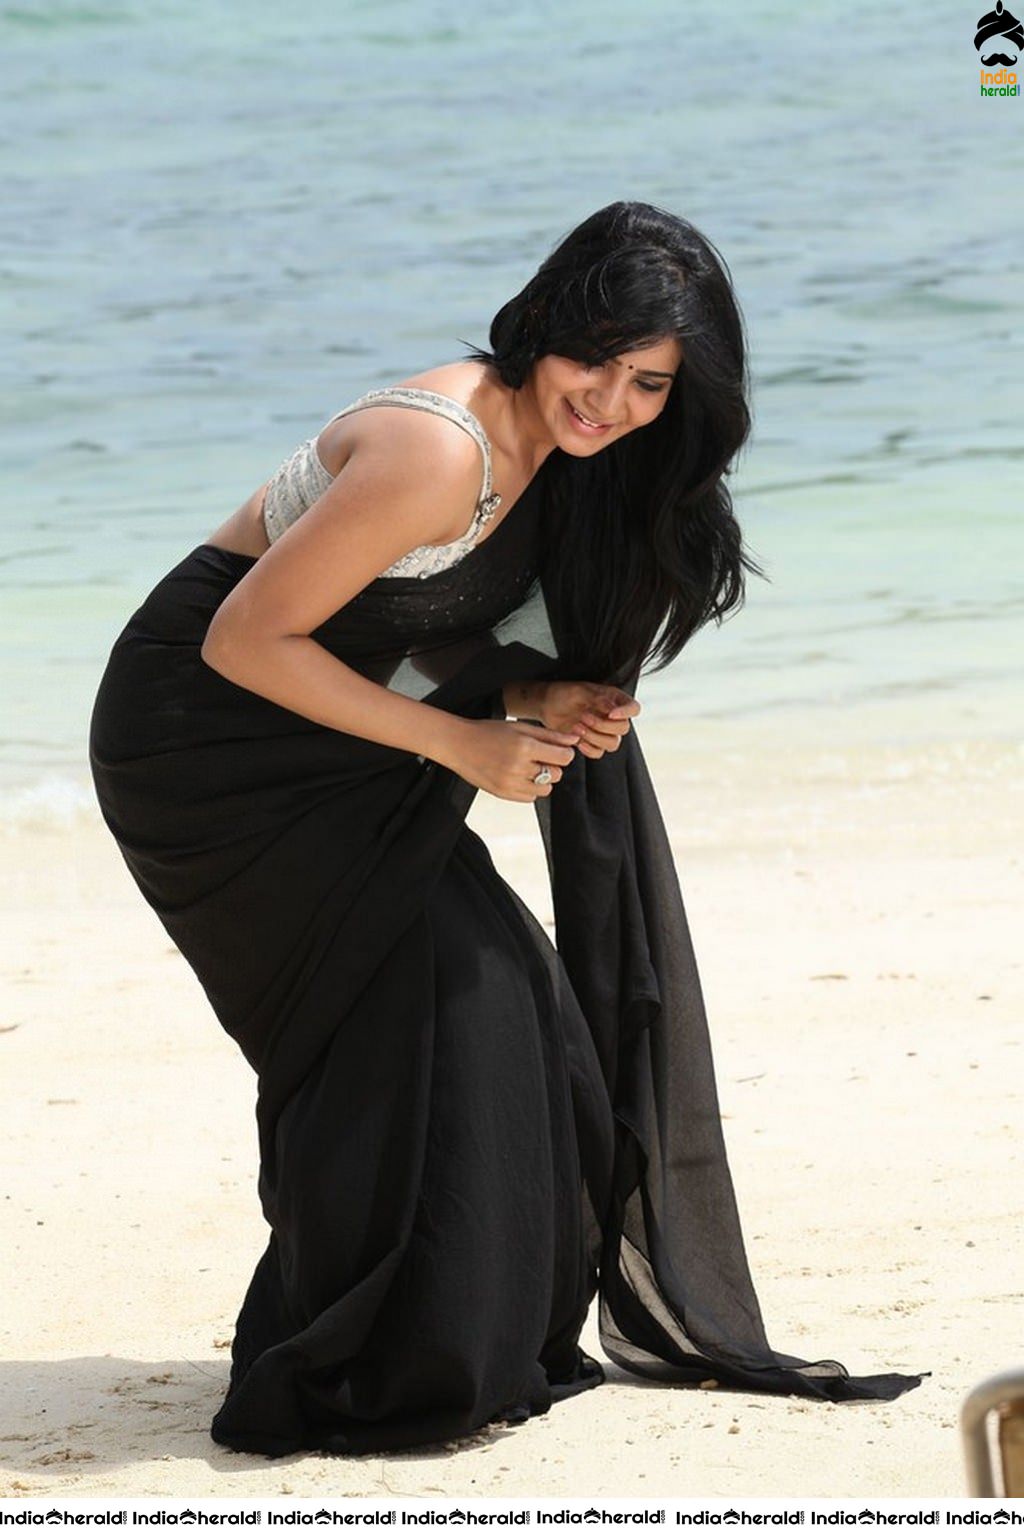 Samantha Showing her Pierced Navel and Teasing Belly in Saree Set 2